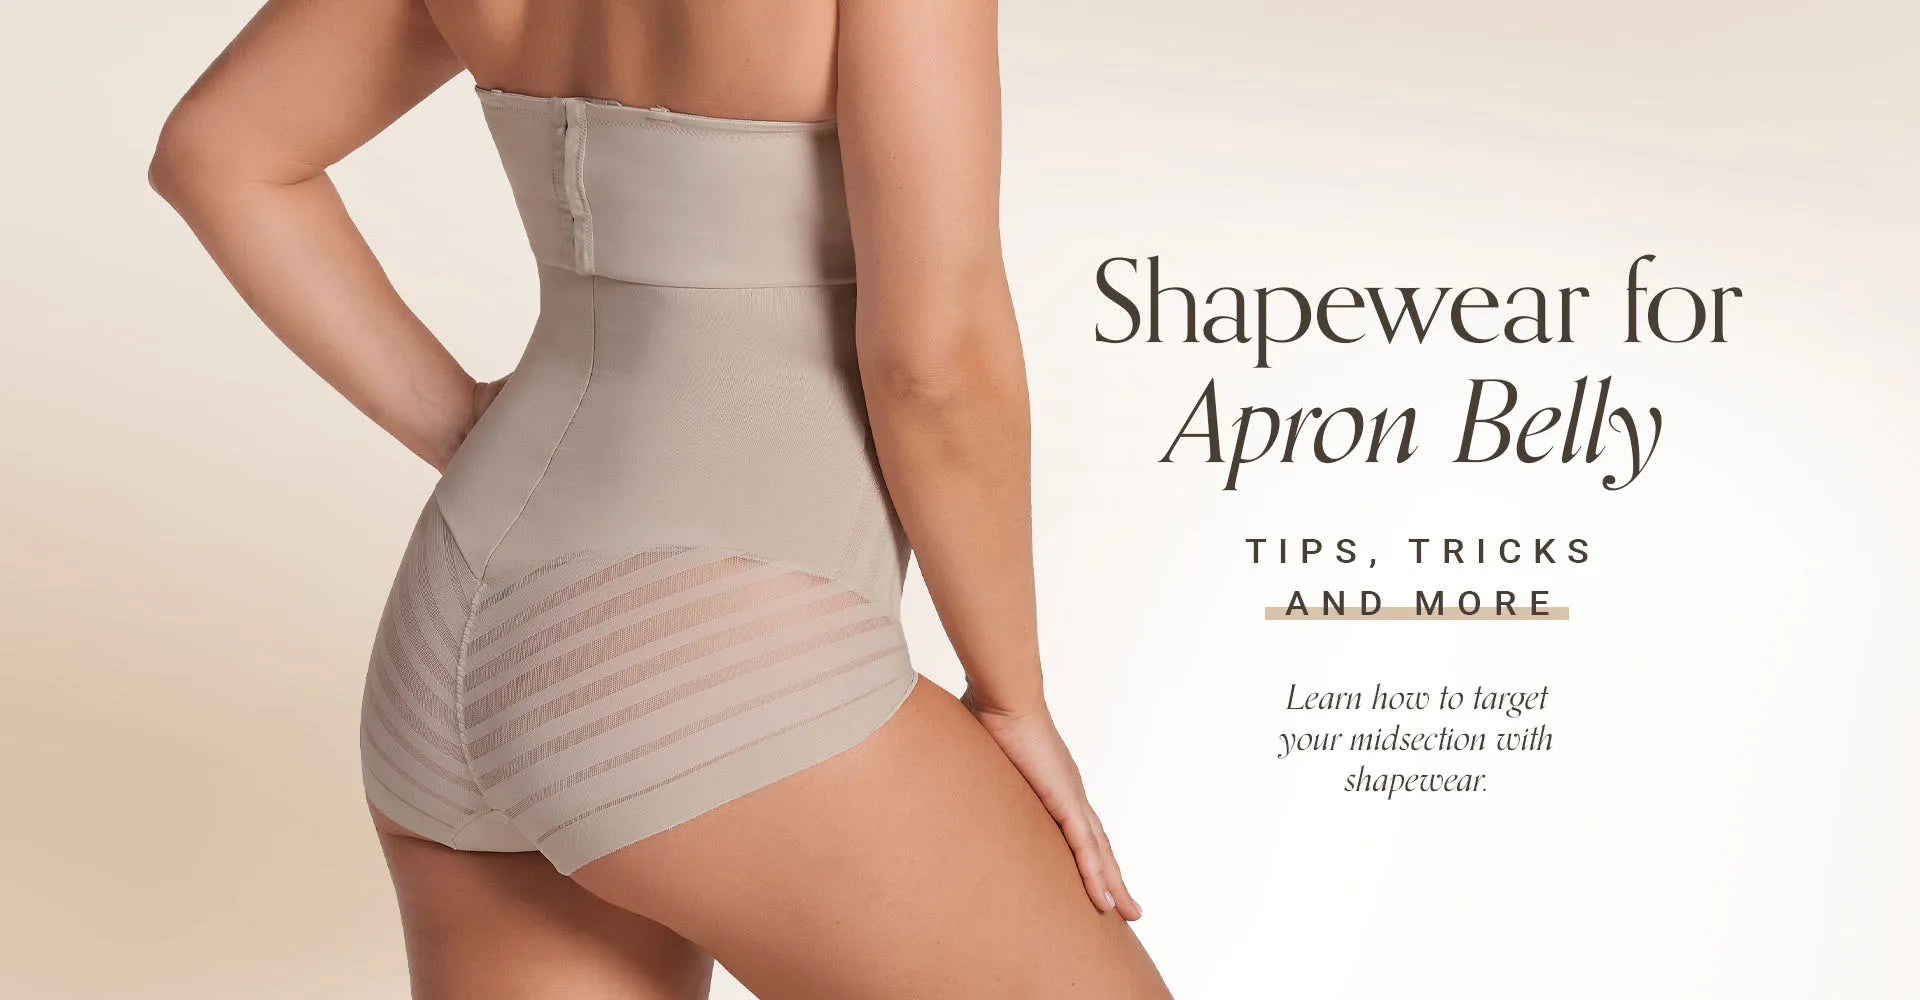 Shapewear for Apron Belly: Tips, Tricks and More